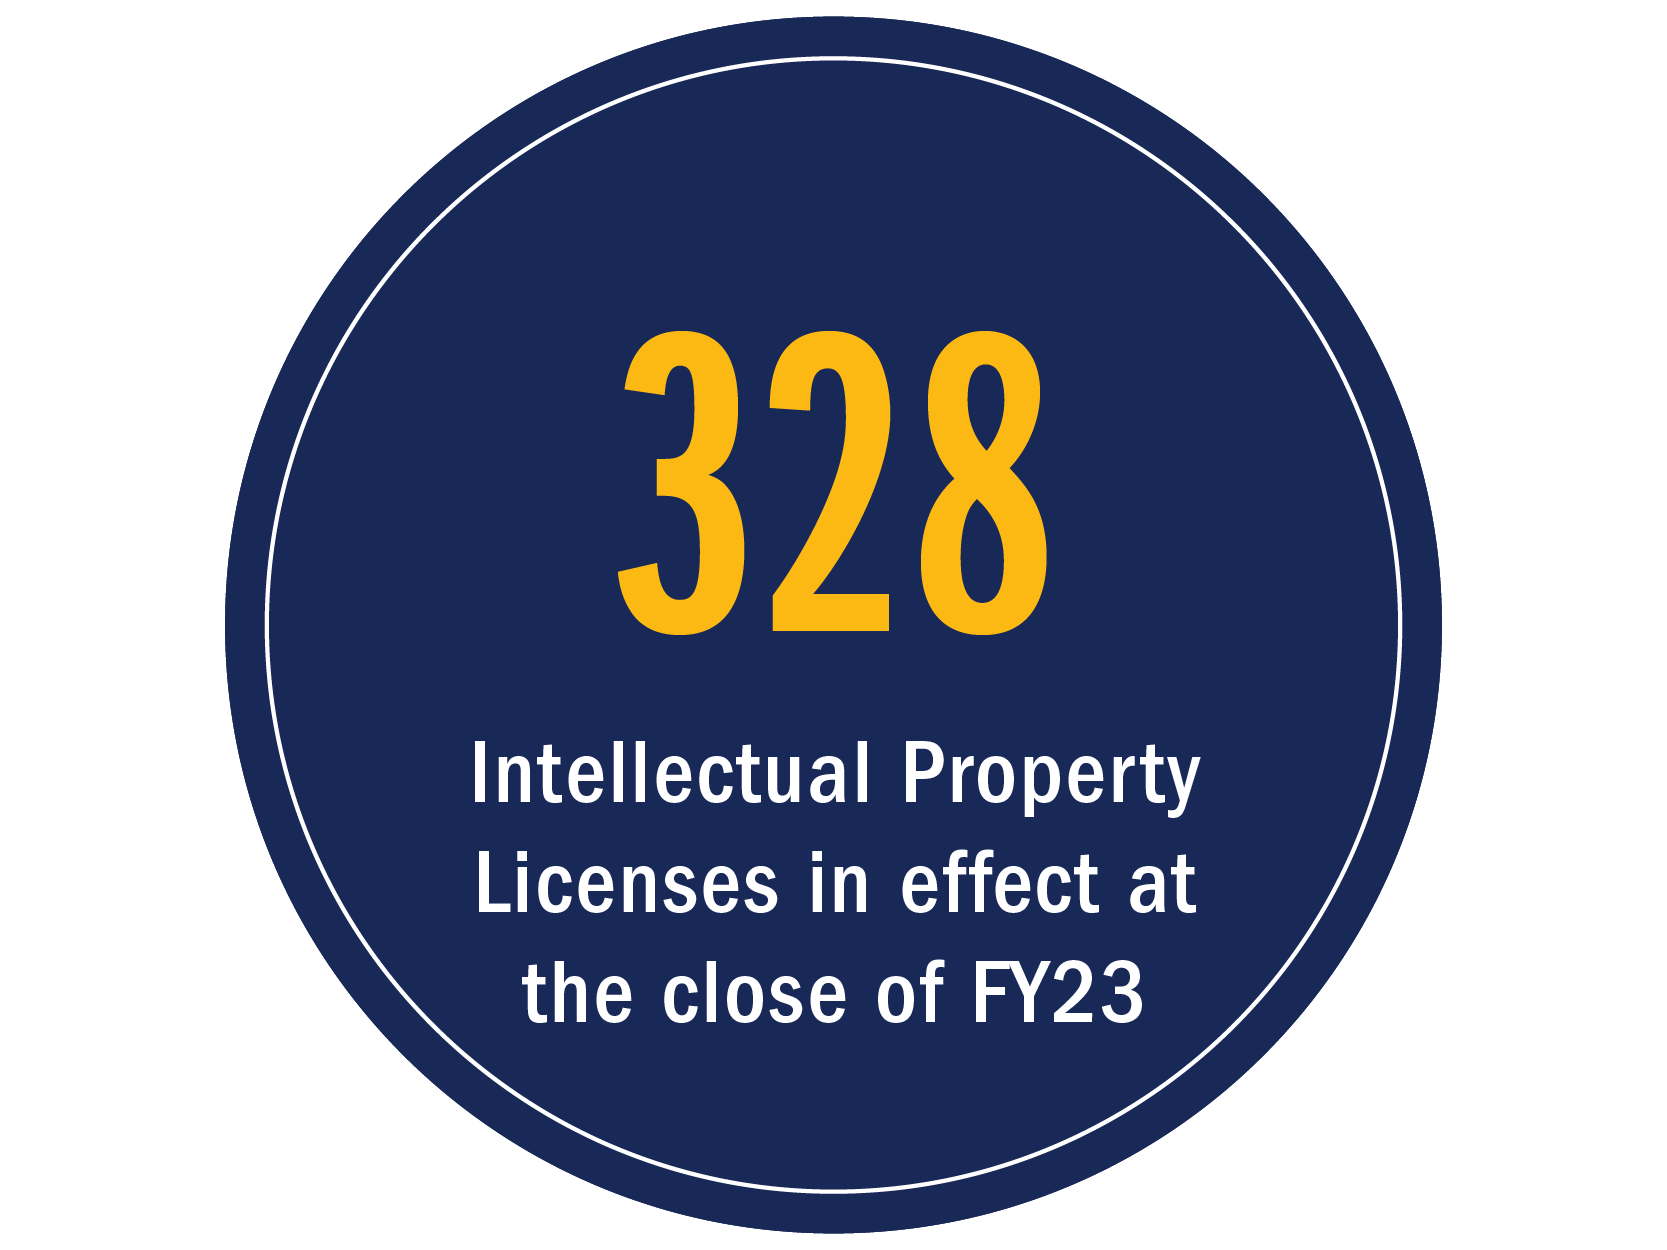 328 intellectual property licenses